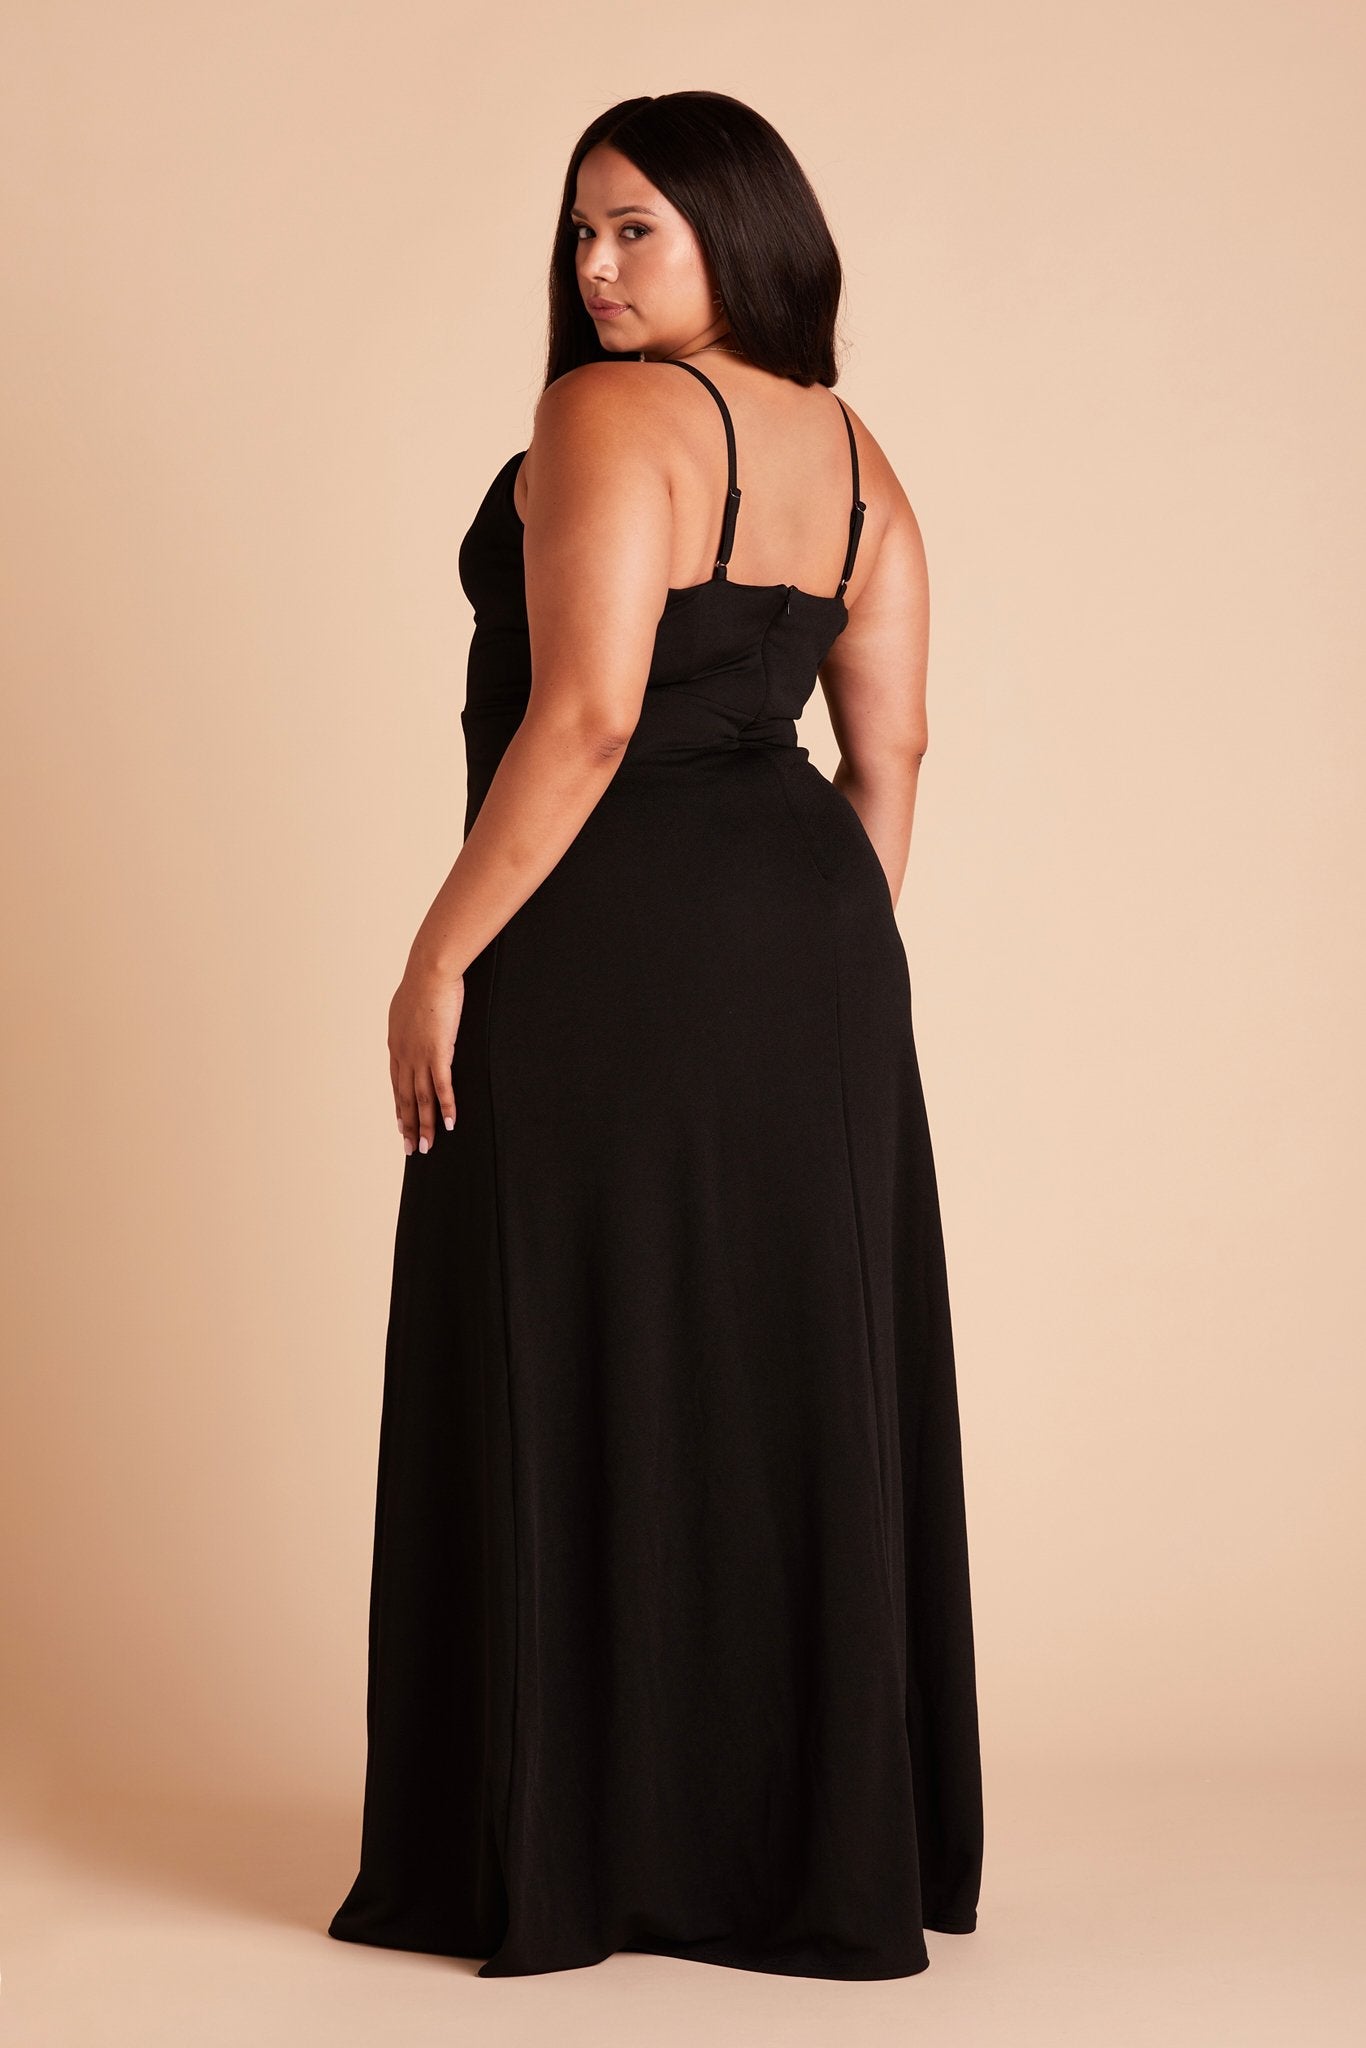 Back view of the Ash Bridesmaid Dress in black crepe shows skinny adjustable straps as well as an open back just below shoulder blades.